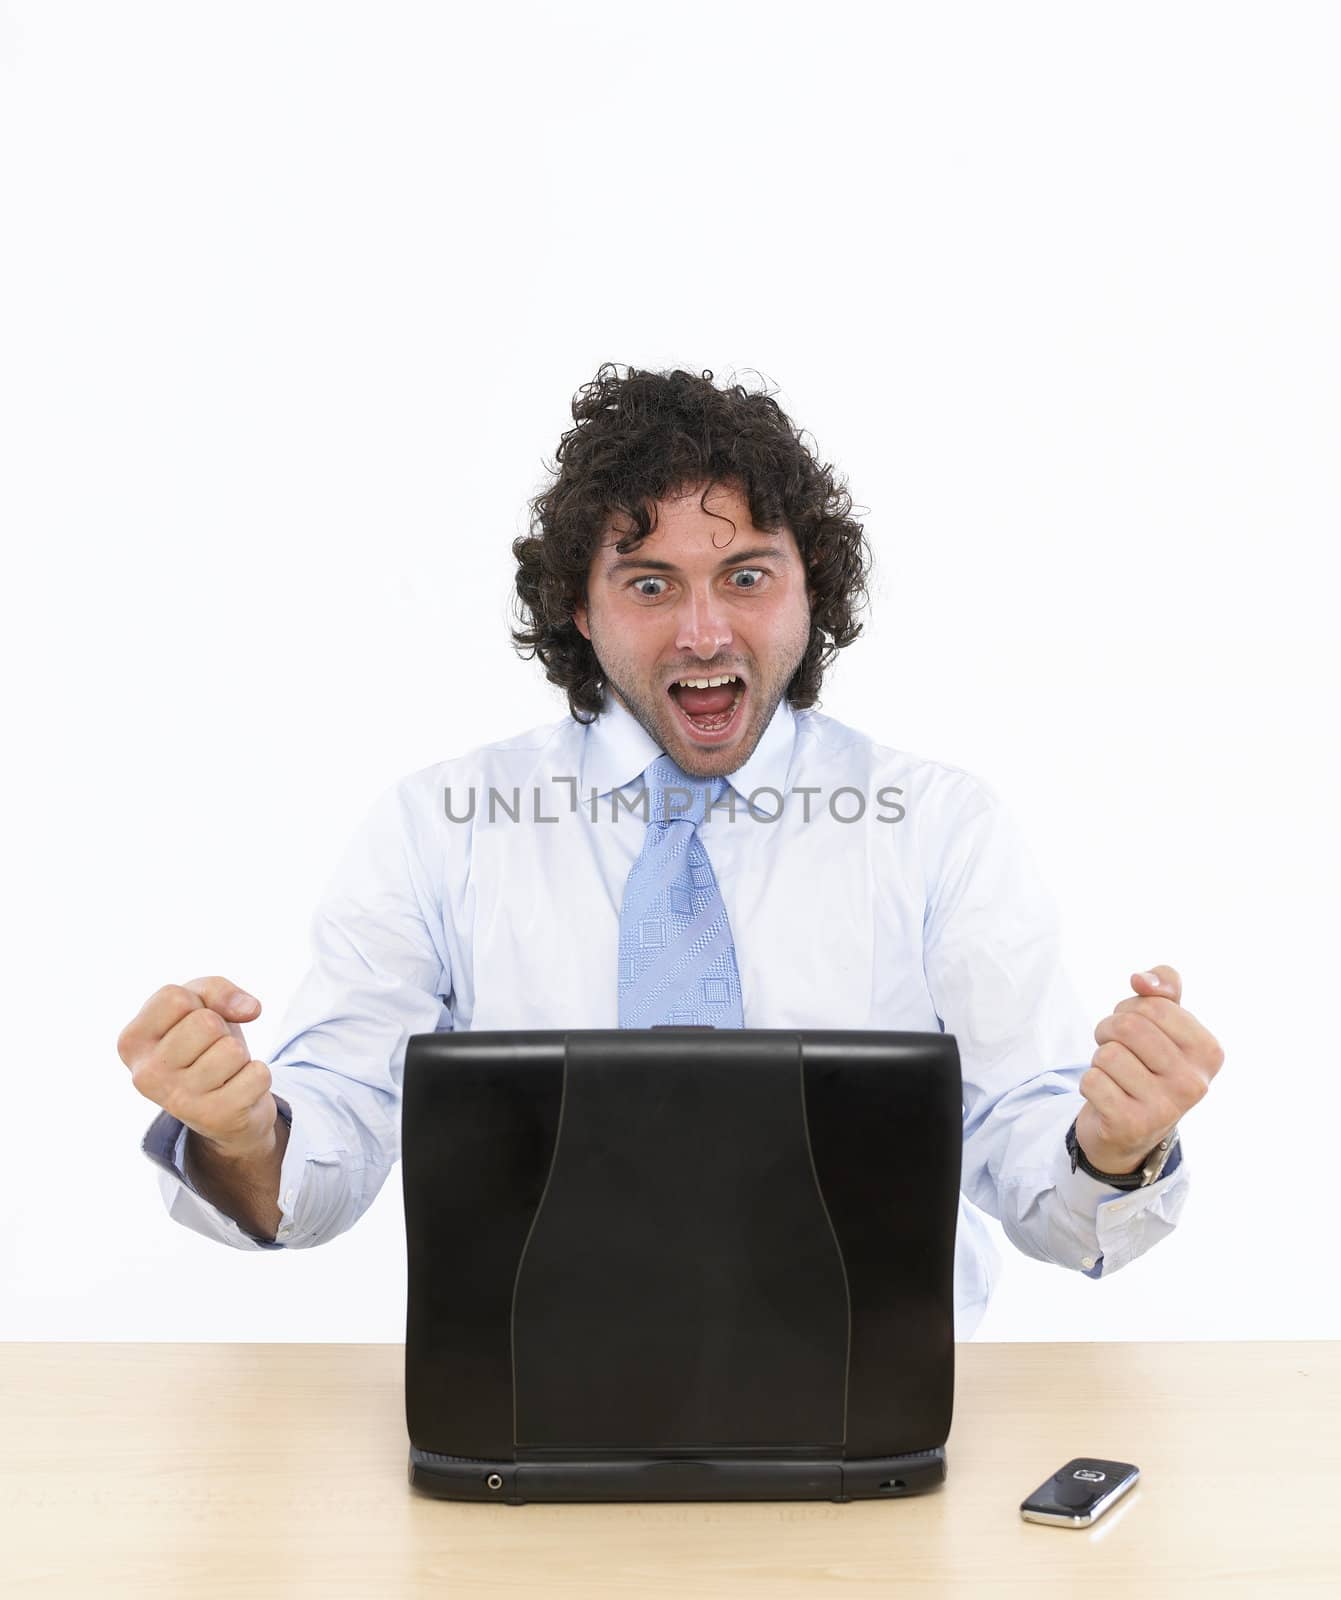 Arms Raised on Laptop isolated in white